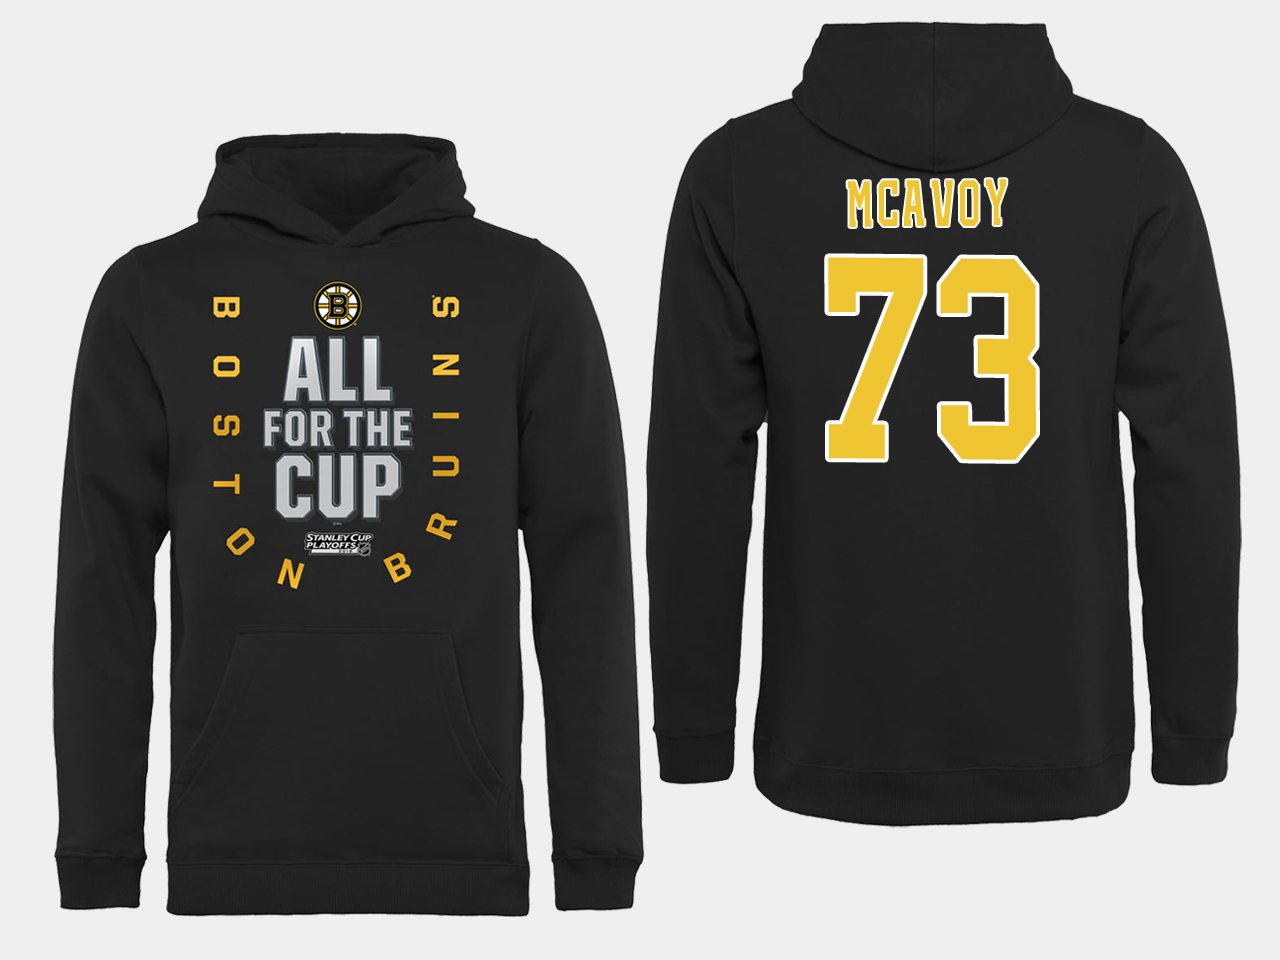 NHL Men Boston Bruins #73 Mcavoy Black All for the Cup Hoodie